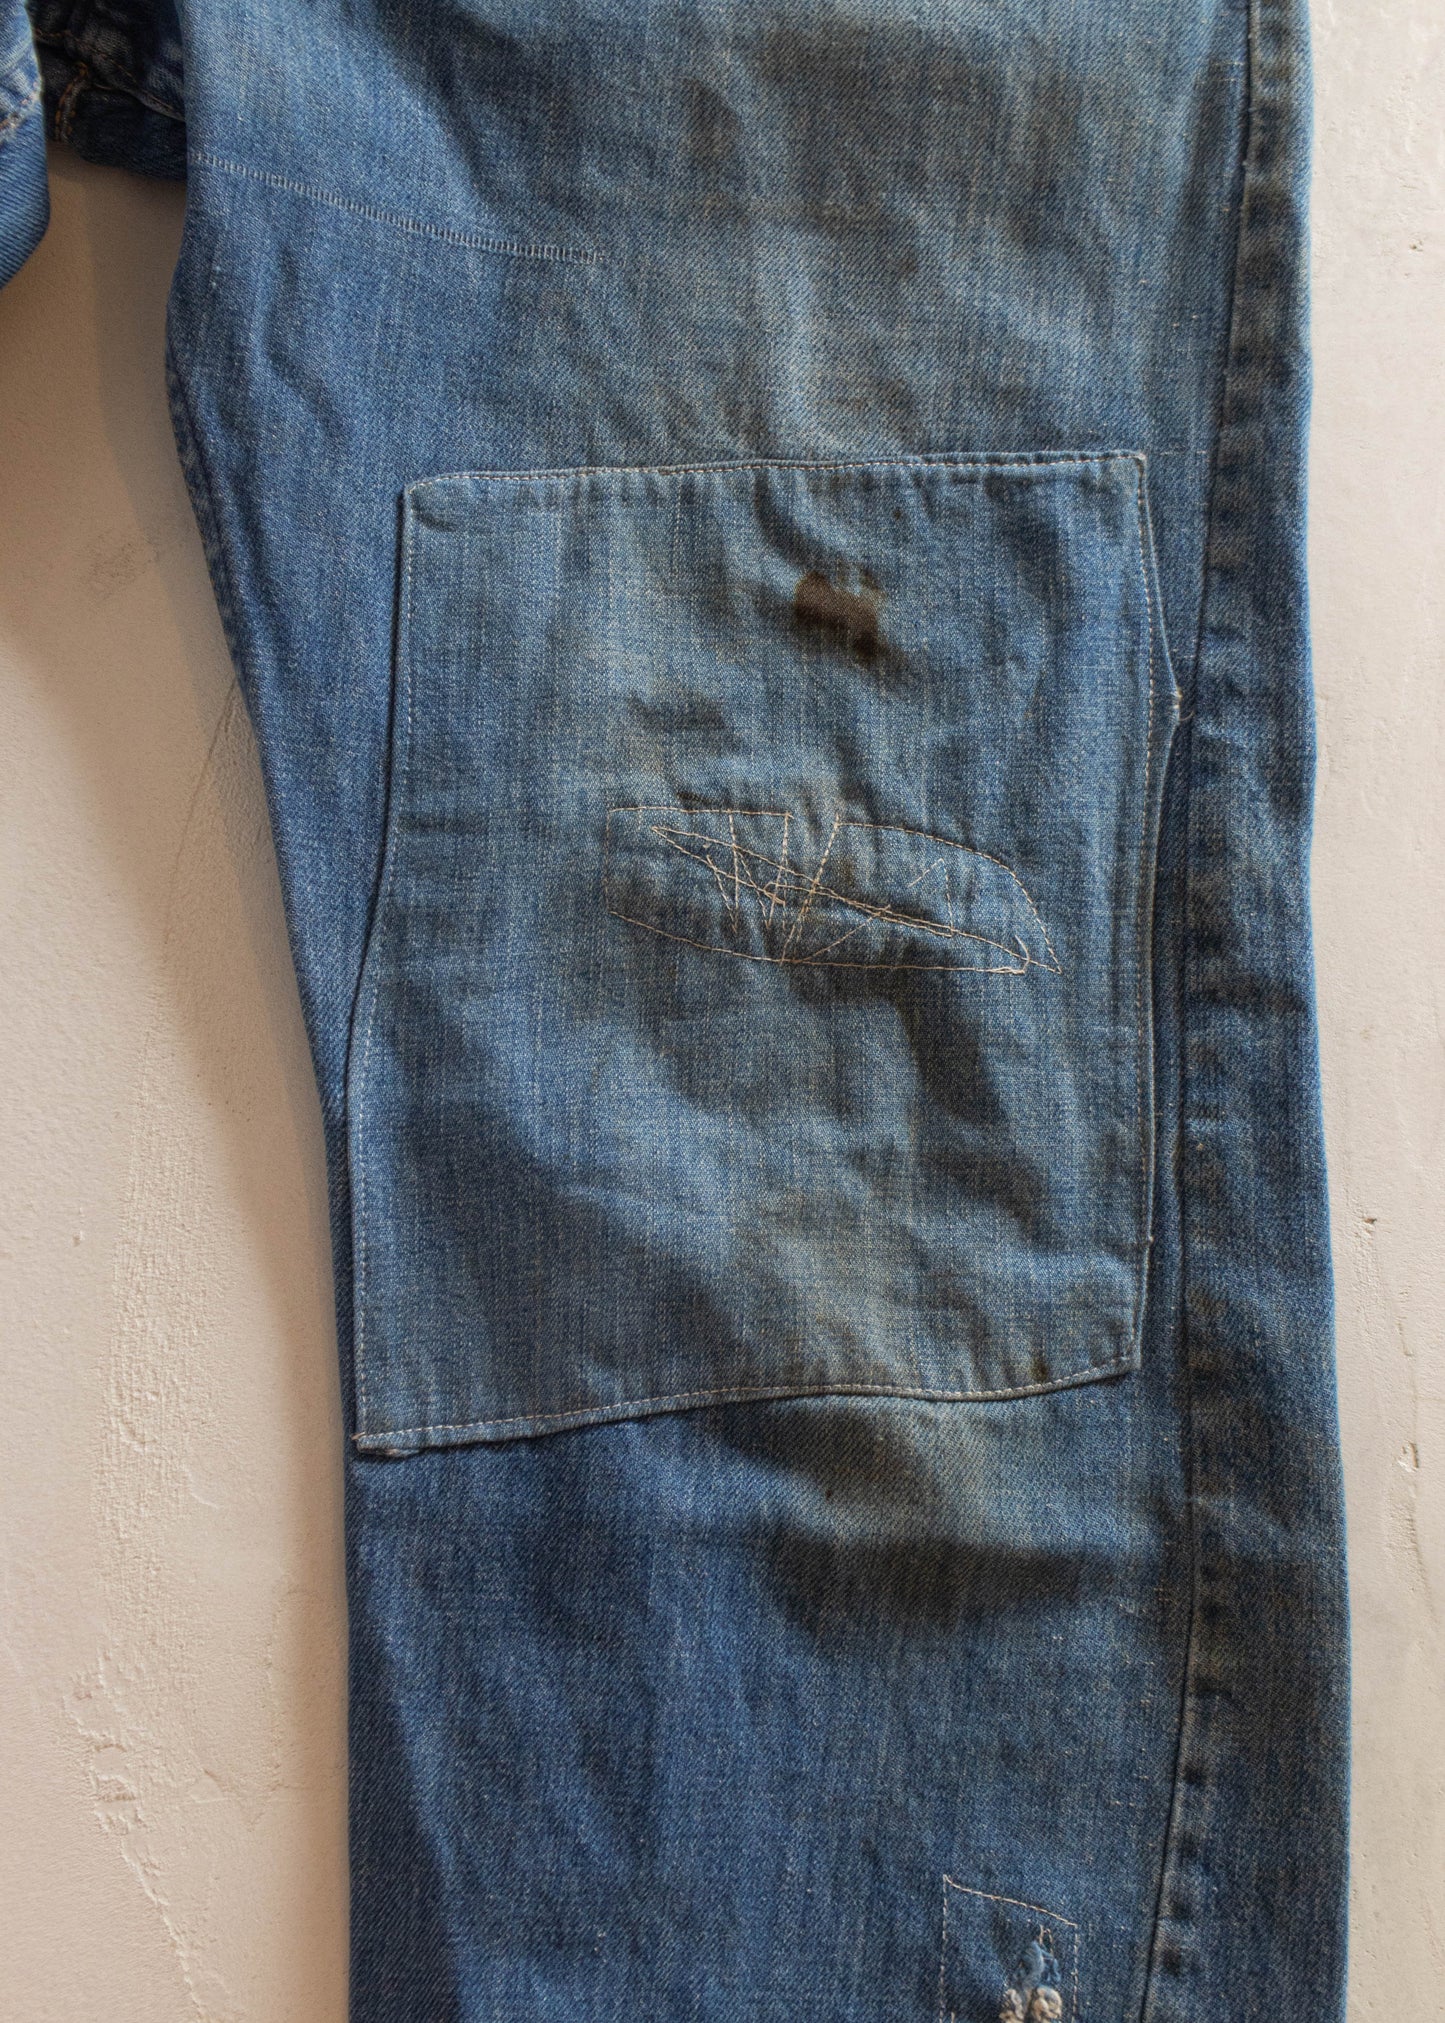 1960s Ranch Craft by JCPenney Mended Jeans Size Women's 32 Men's 32